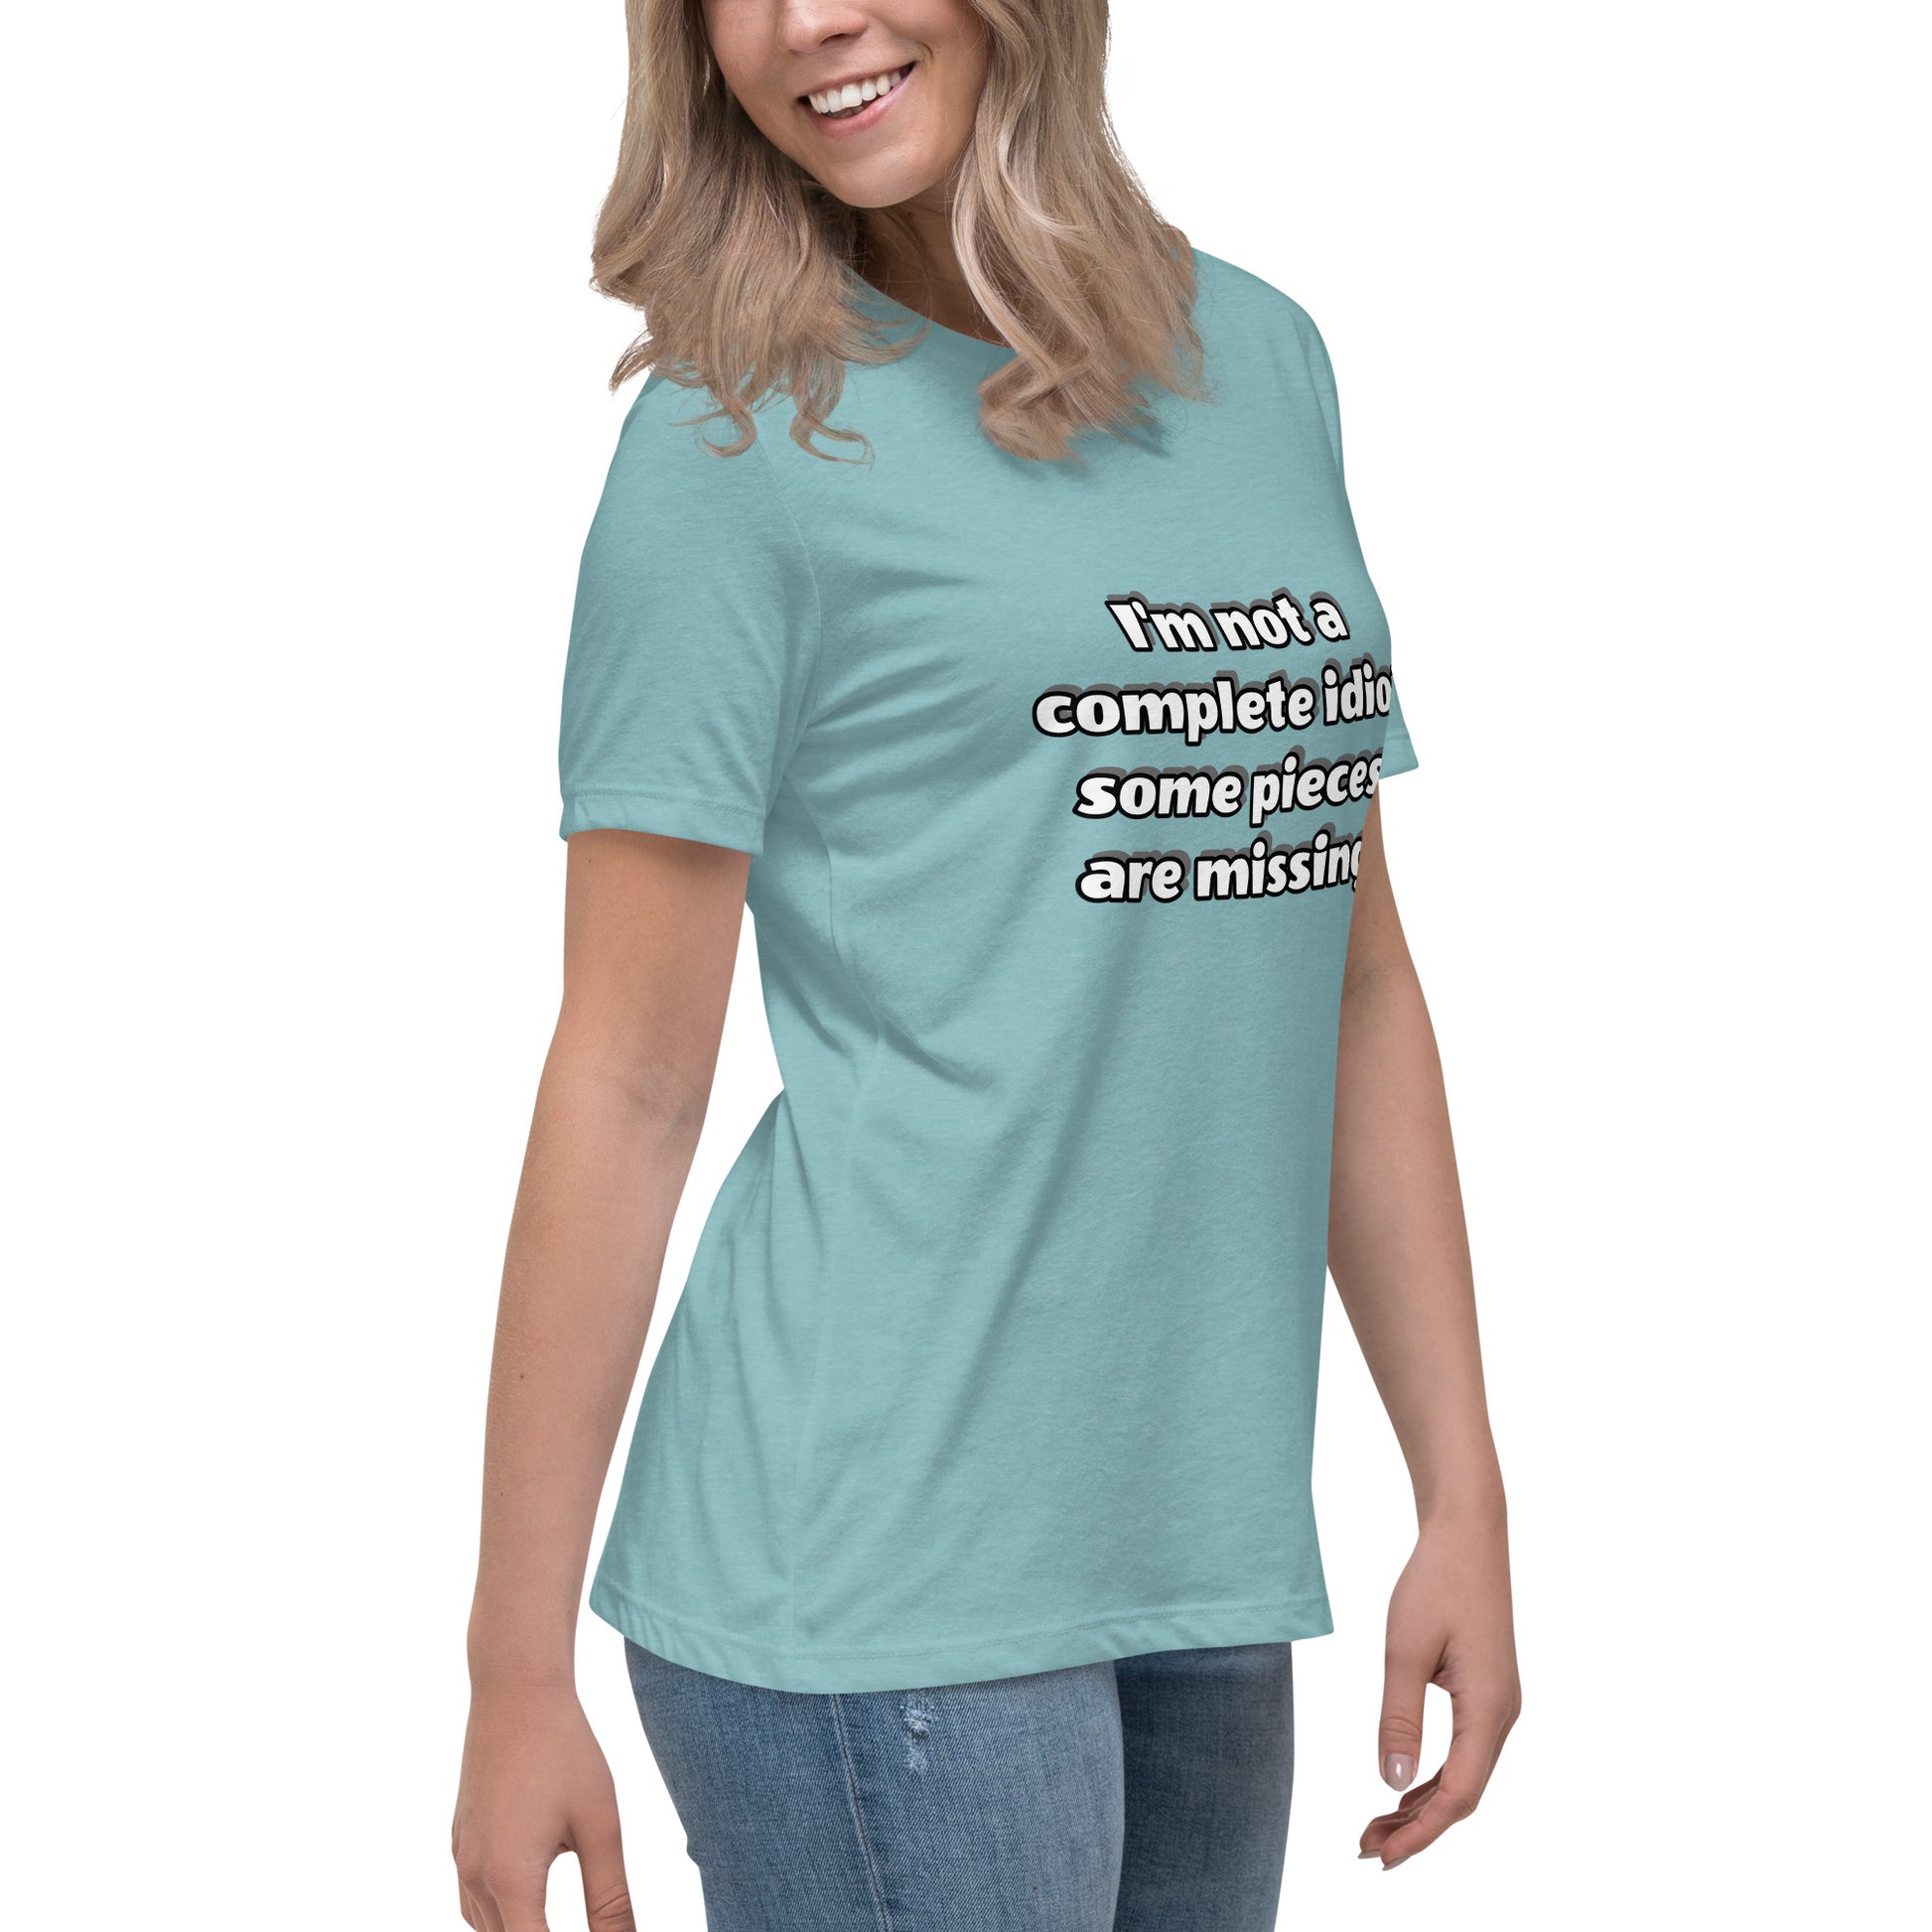 Women with blue lagoon t-shirt with text “I’m not a complete idiot, some pieces are missing”